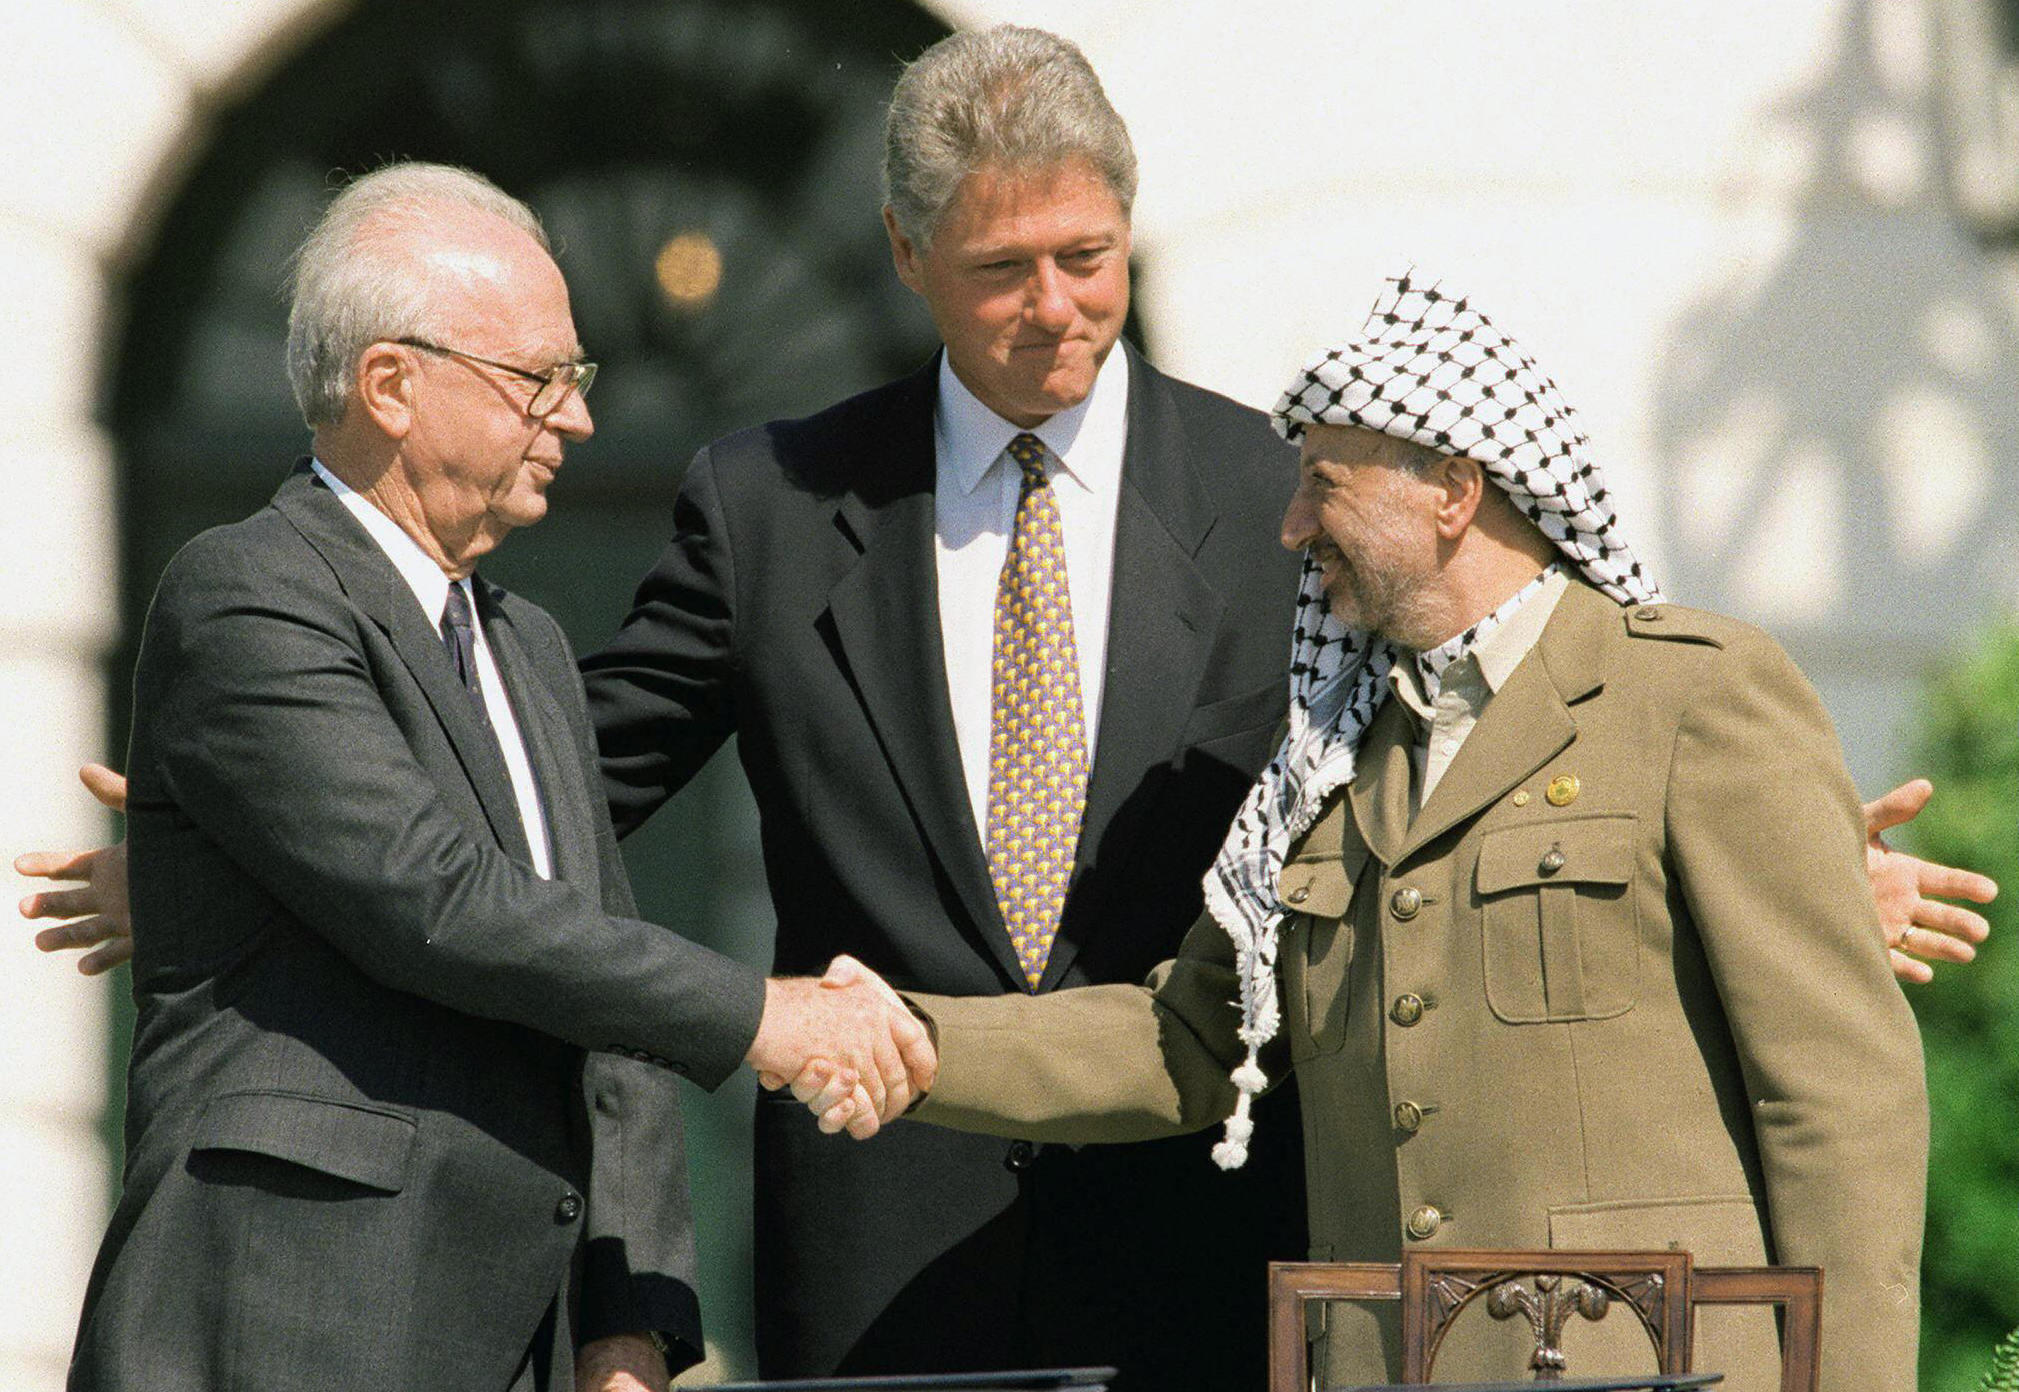 Larry King’s Death As Reminder of the Night Yasser Arafat Slept in the UN Chief’s Office